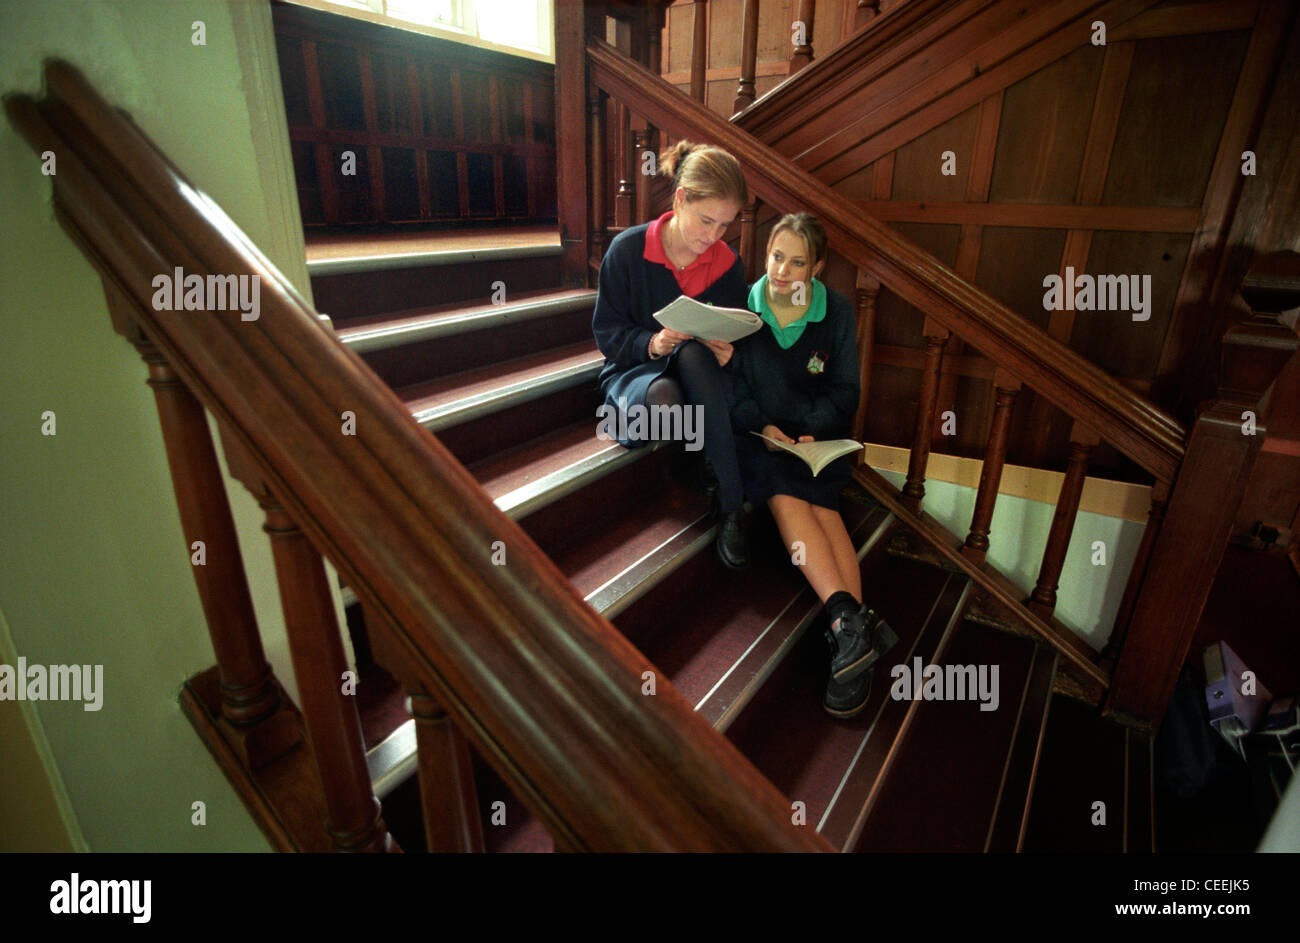 Two Roedean schoolgirl pupils compare notes in between lessons on the grand staircase. Stock Photo